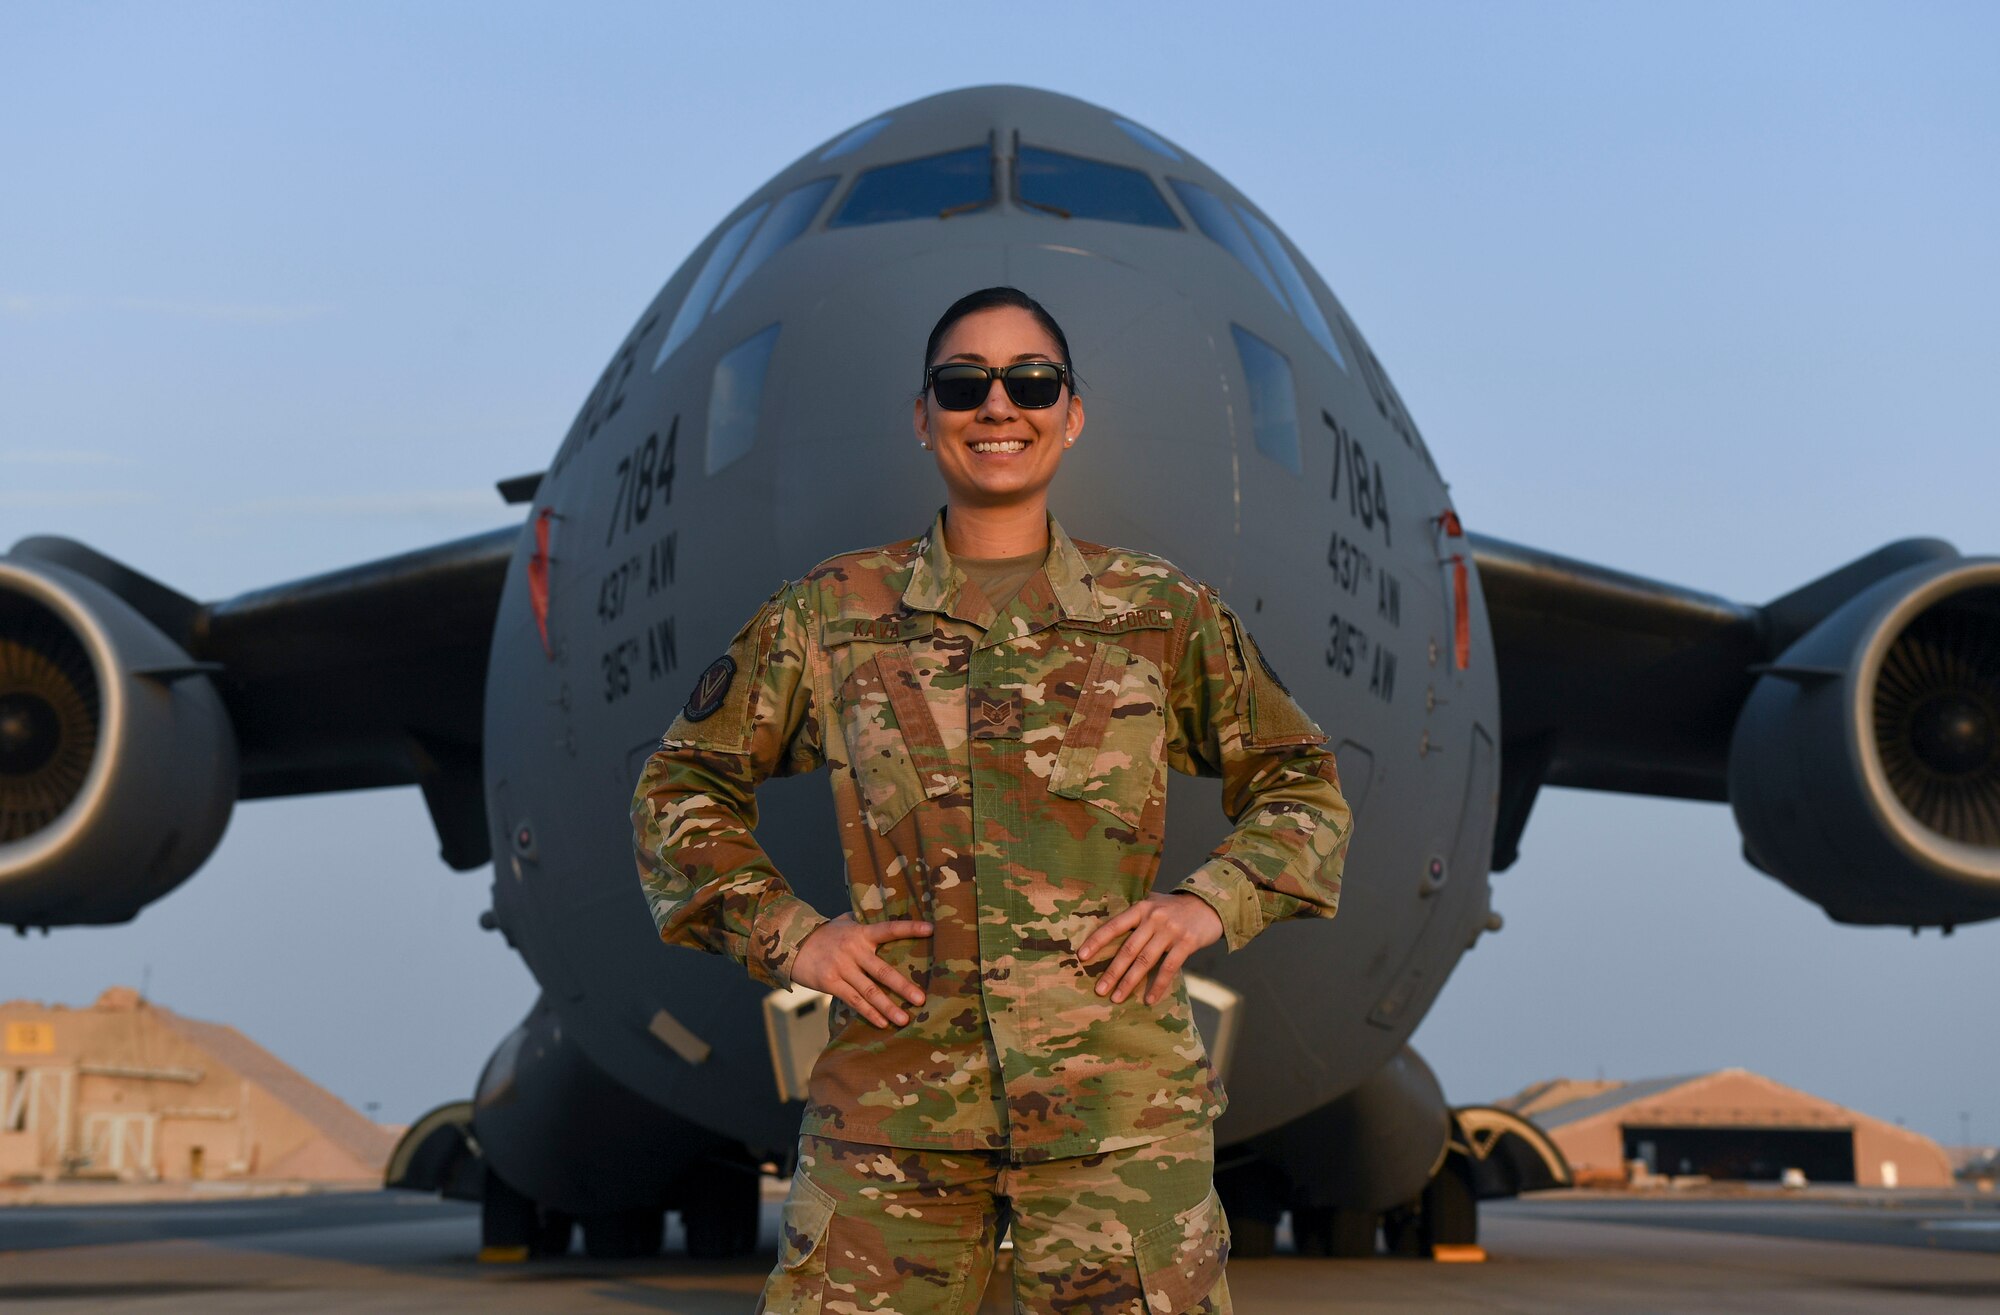 U.S. Air Force Staff Sgt. Cinnamon Kava, 5th Expeditionary Air Mobility Squadron combat oriented support operations supply specialist, poses in front of a C-17 Globemaster III at Ali Al Salem Air Base, Kuwait, Nov. 19, 2020.